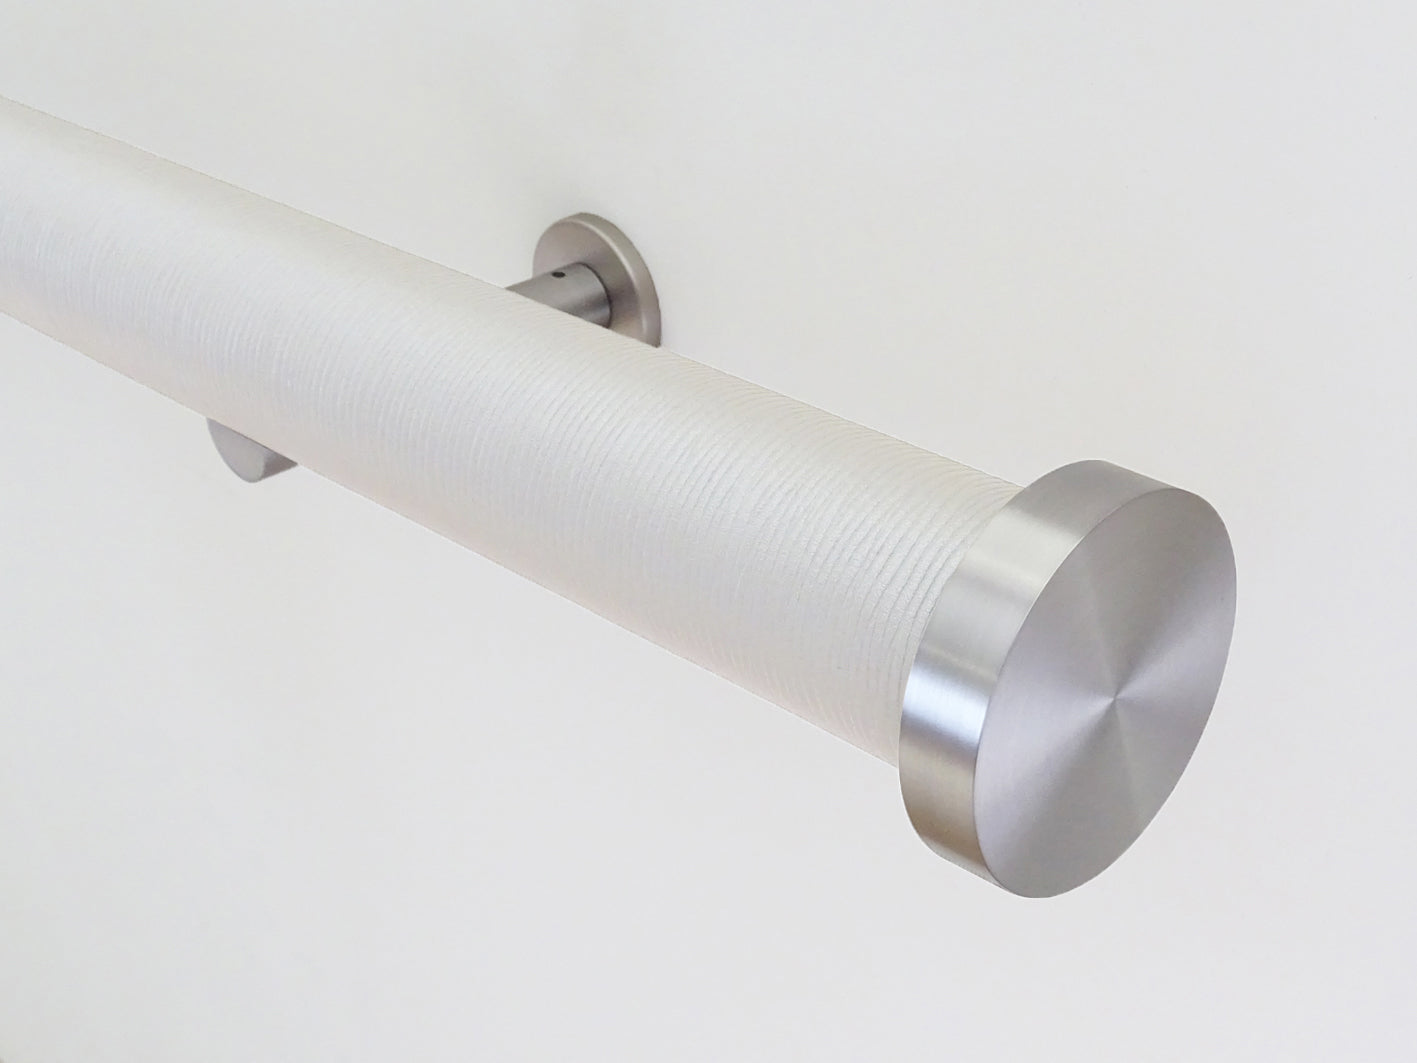 50mm dia. wrapped and tracked curtain pole in opalite